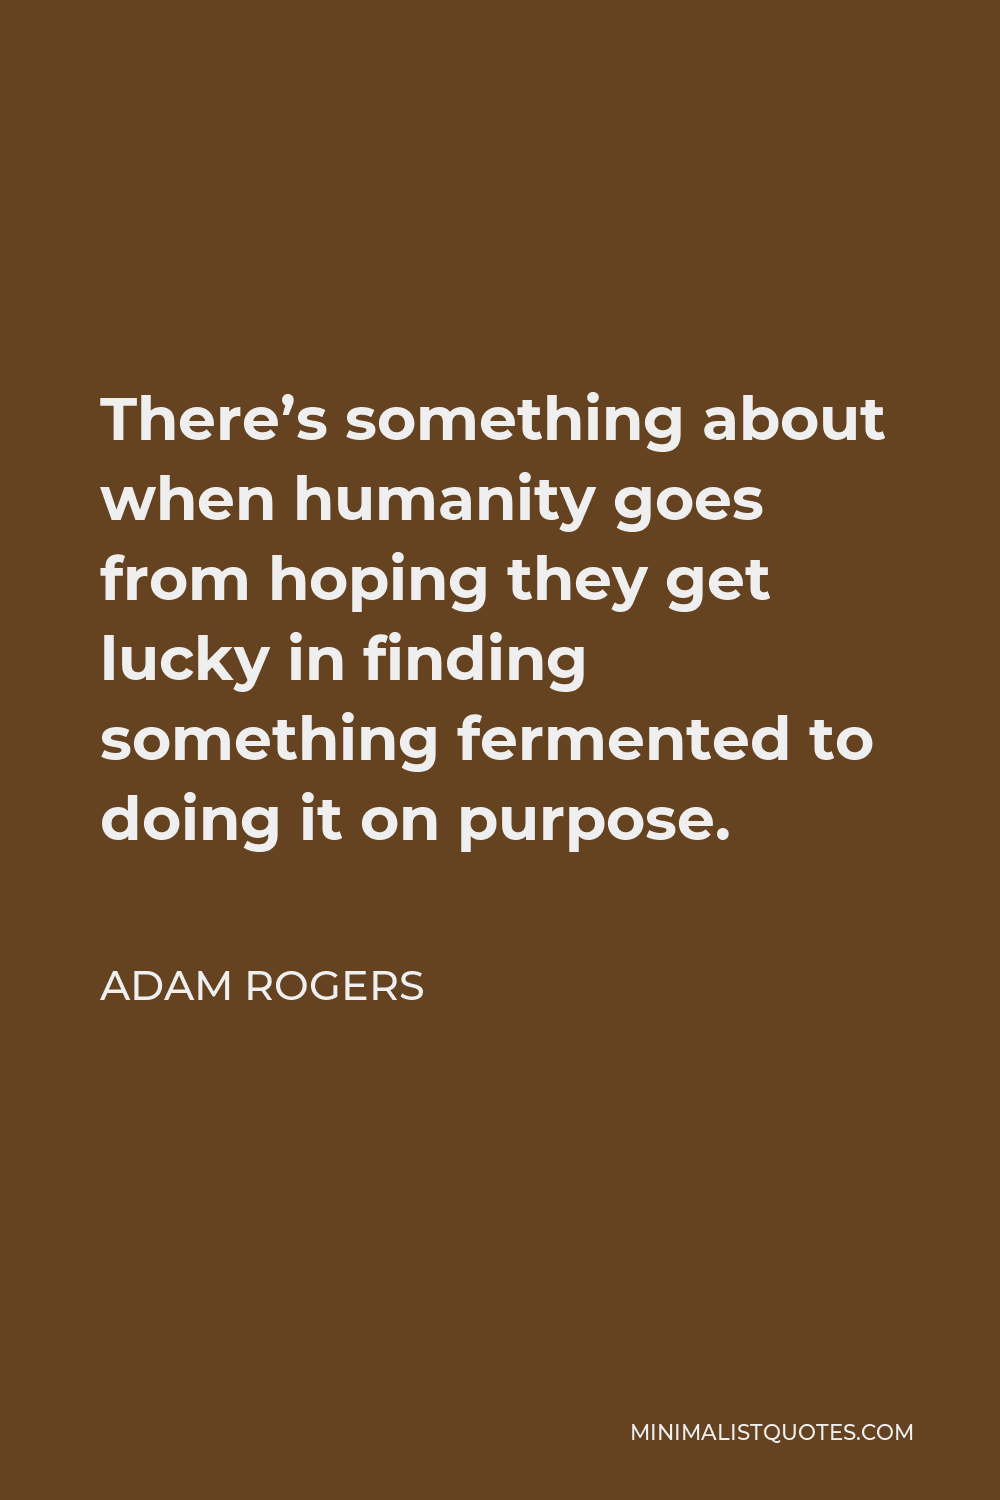 Adam Rogers Quote - There’s something about when humanity goes from hoping they get lucky in finding something fermented to doing it on purpose.